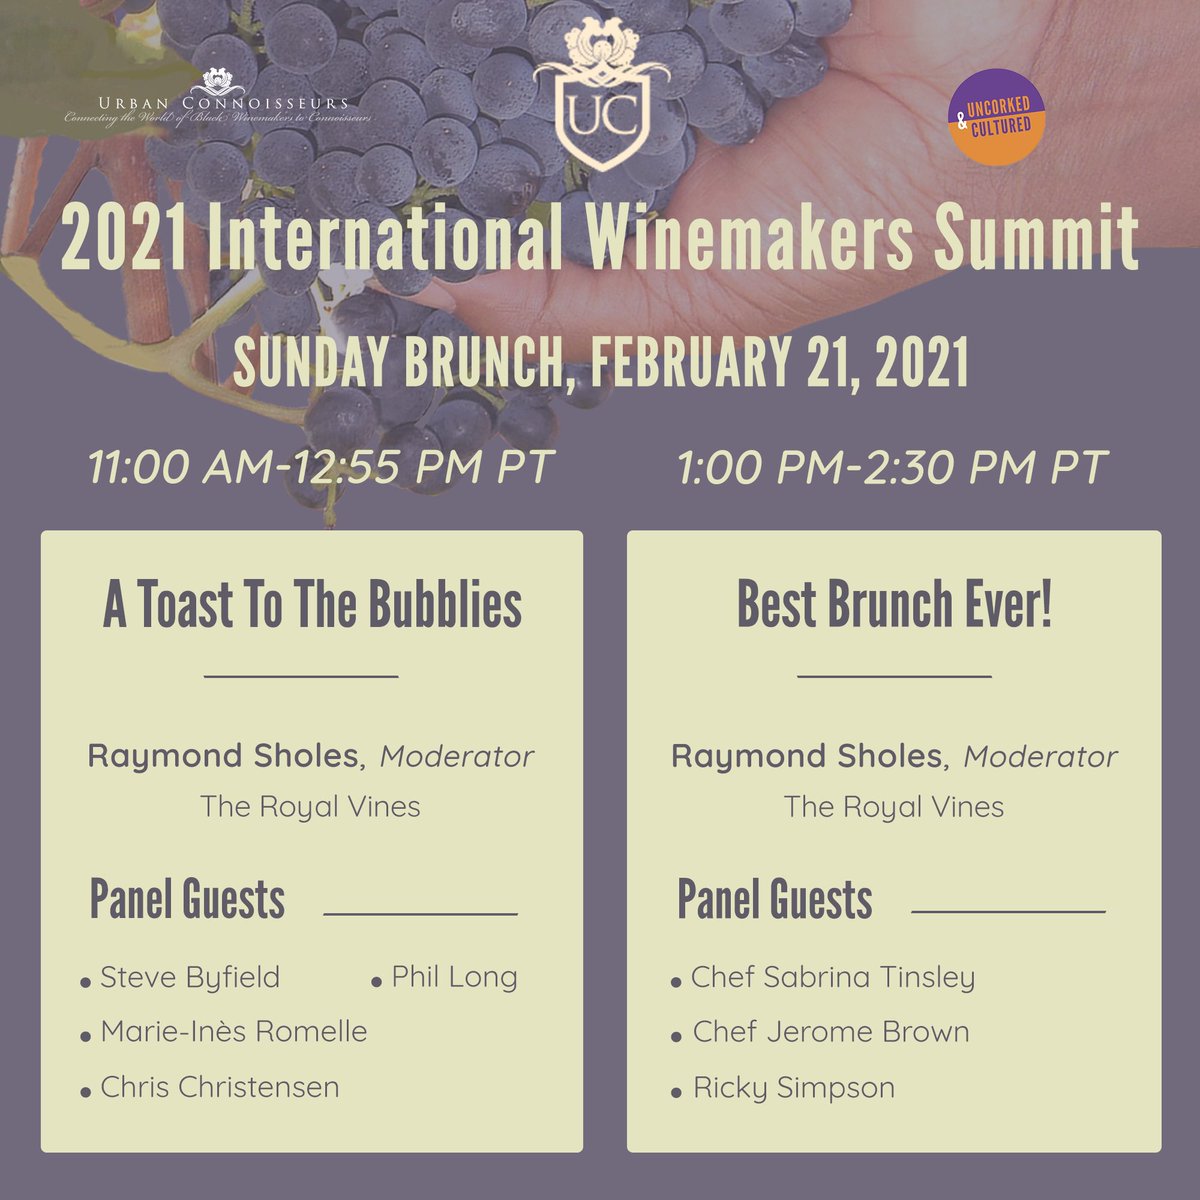 Check out the 2021 #InternationalWinemakersSummit schedule!

Register today to meet 12 award-winning #blackwinemakers & learn more about #wine. Perfect way to spend #BHM w/ #blackownedwine

bit.ly/3nRMCgp

#winesummit #wineexperience #buyblackwine #wine #diversityinwine